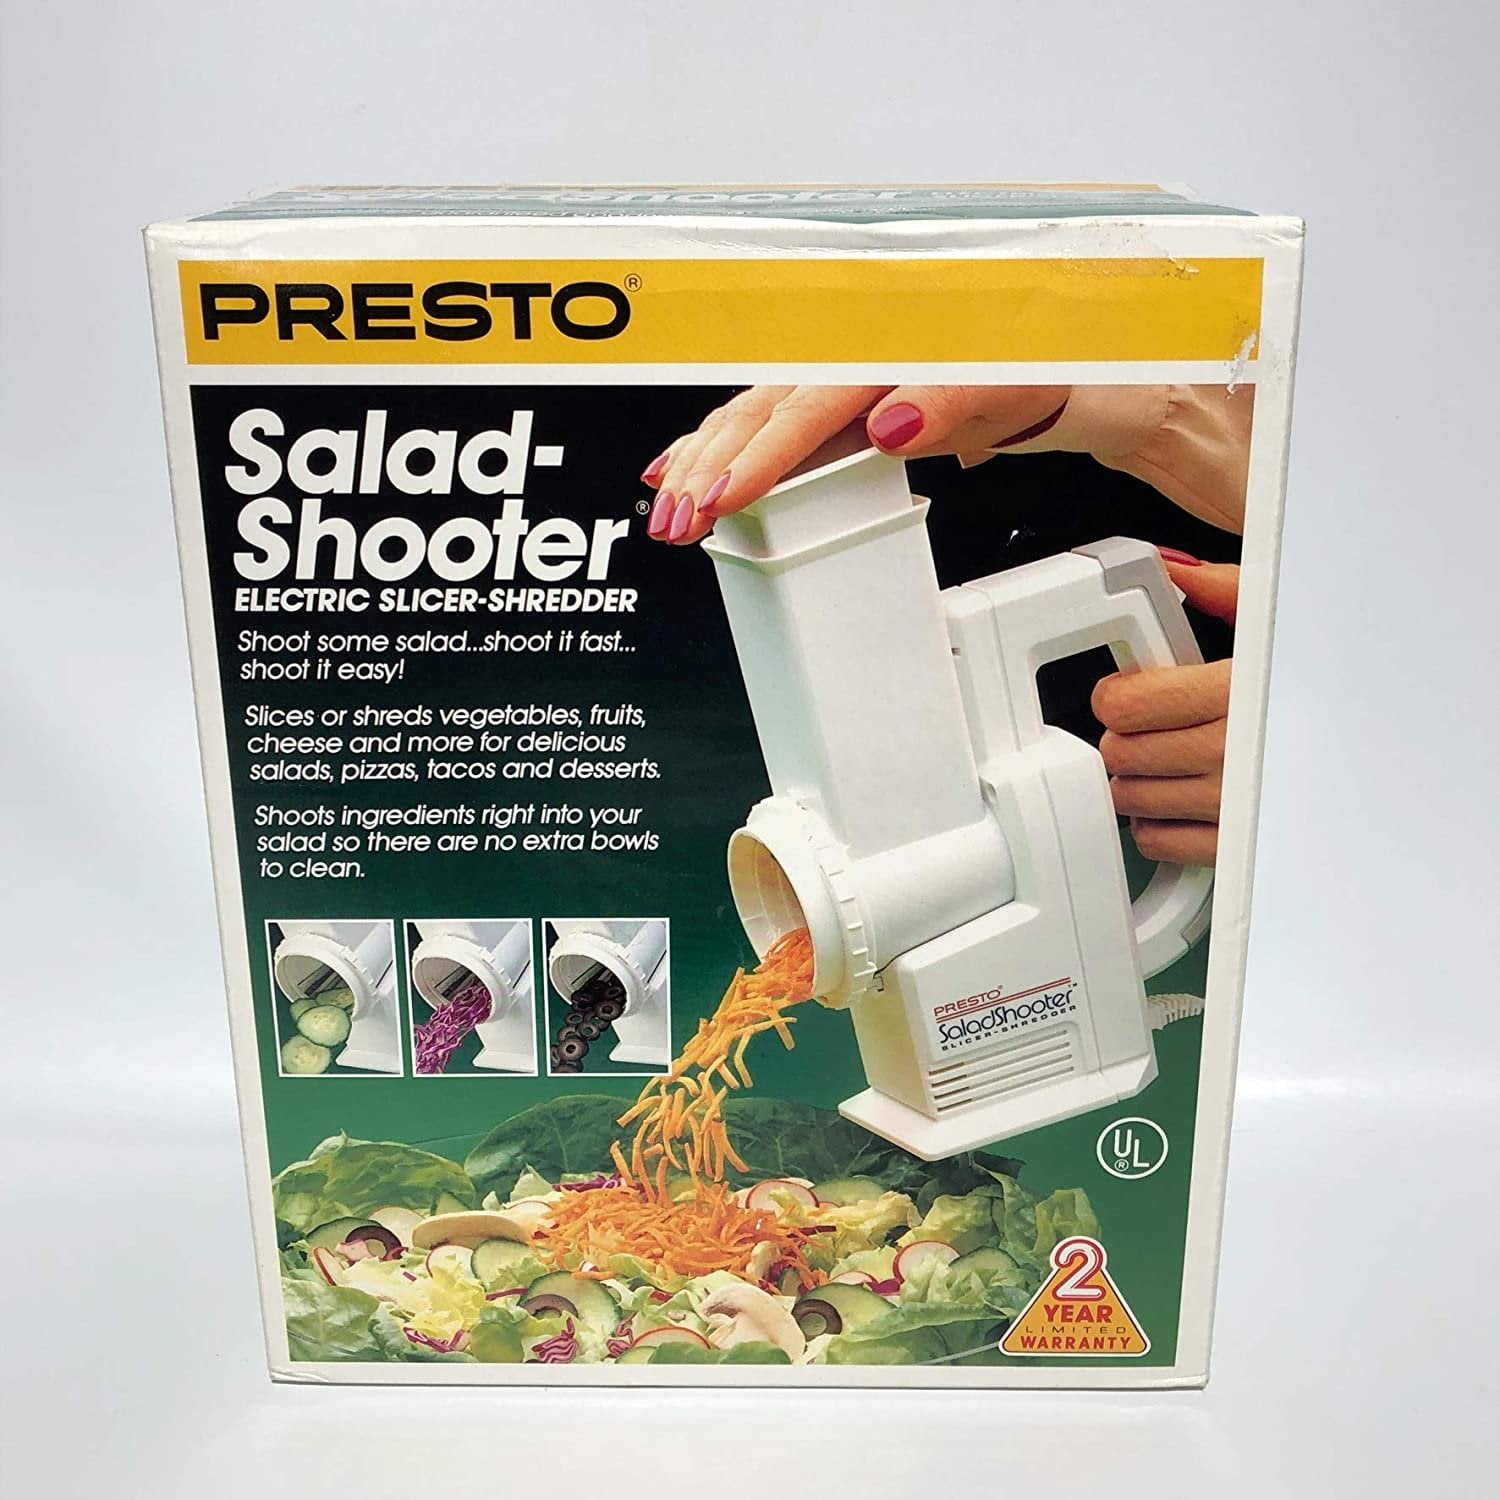 Presto salad shooter plus Replacement Parts - Choice